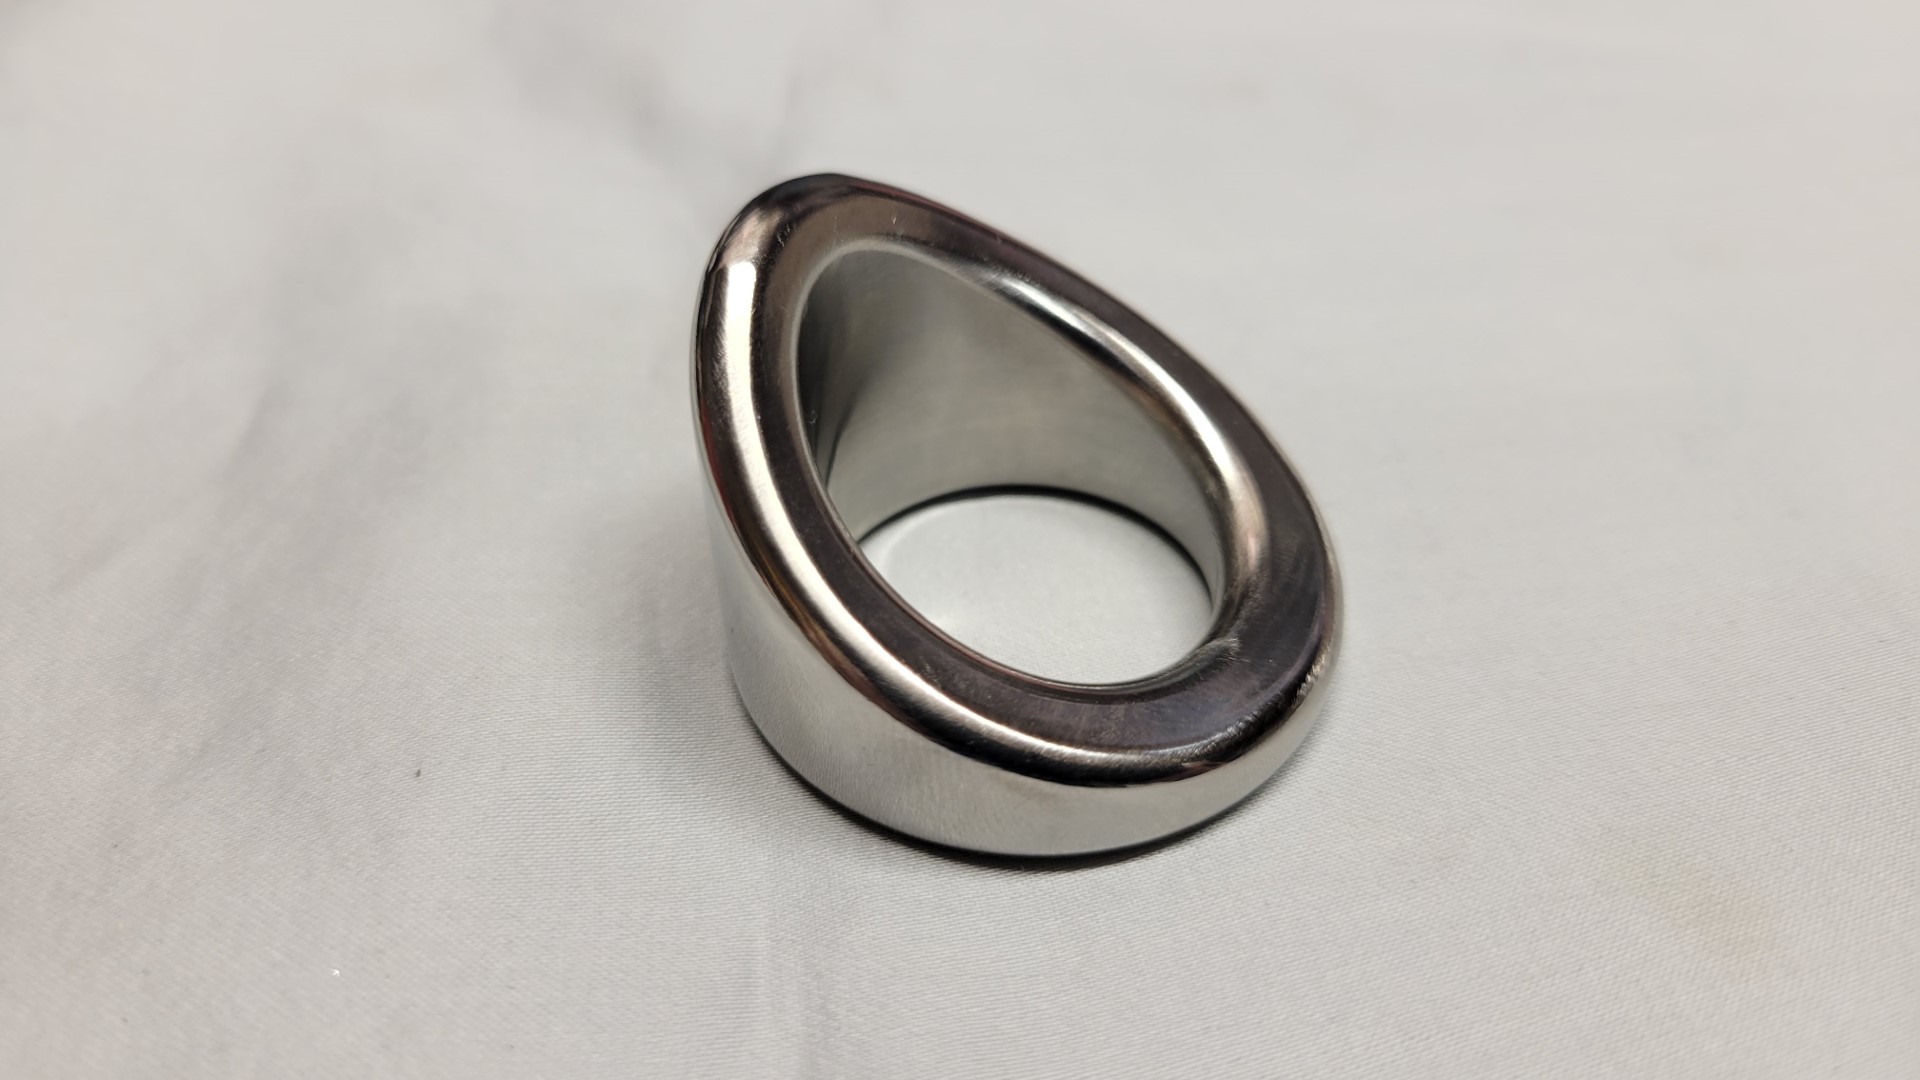 Himeros, Metal Cock rings from Tungsten Carbide